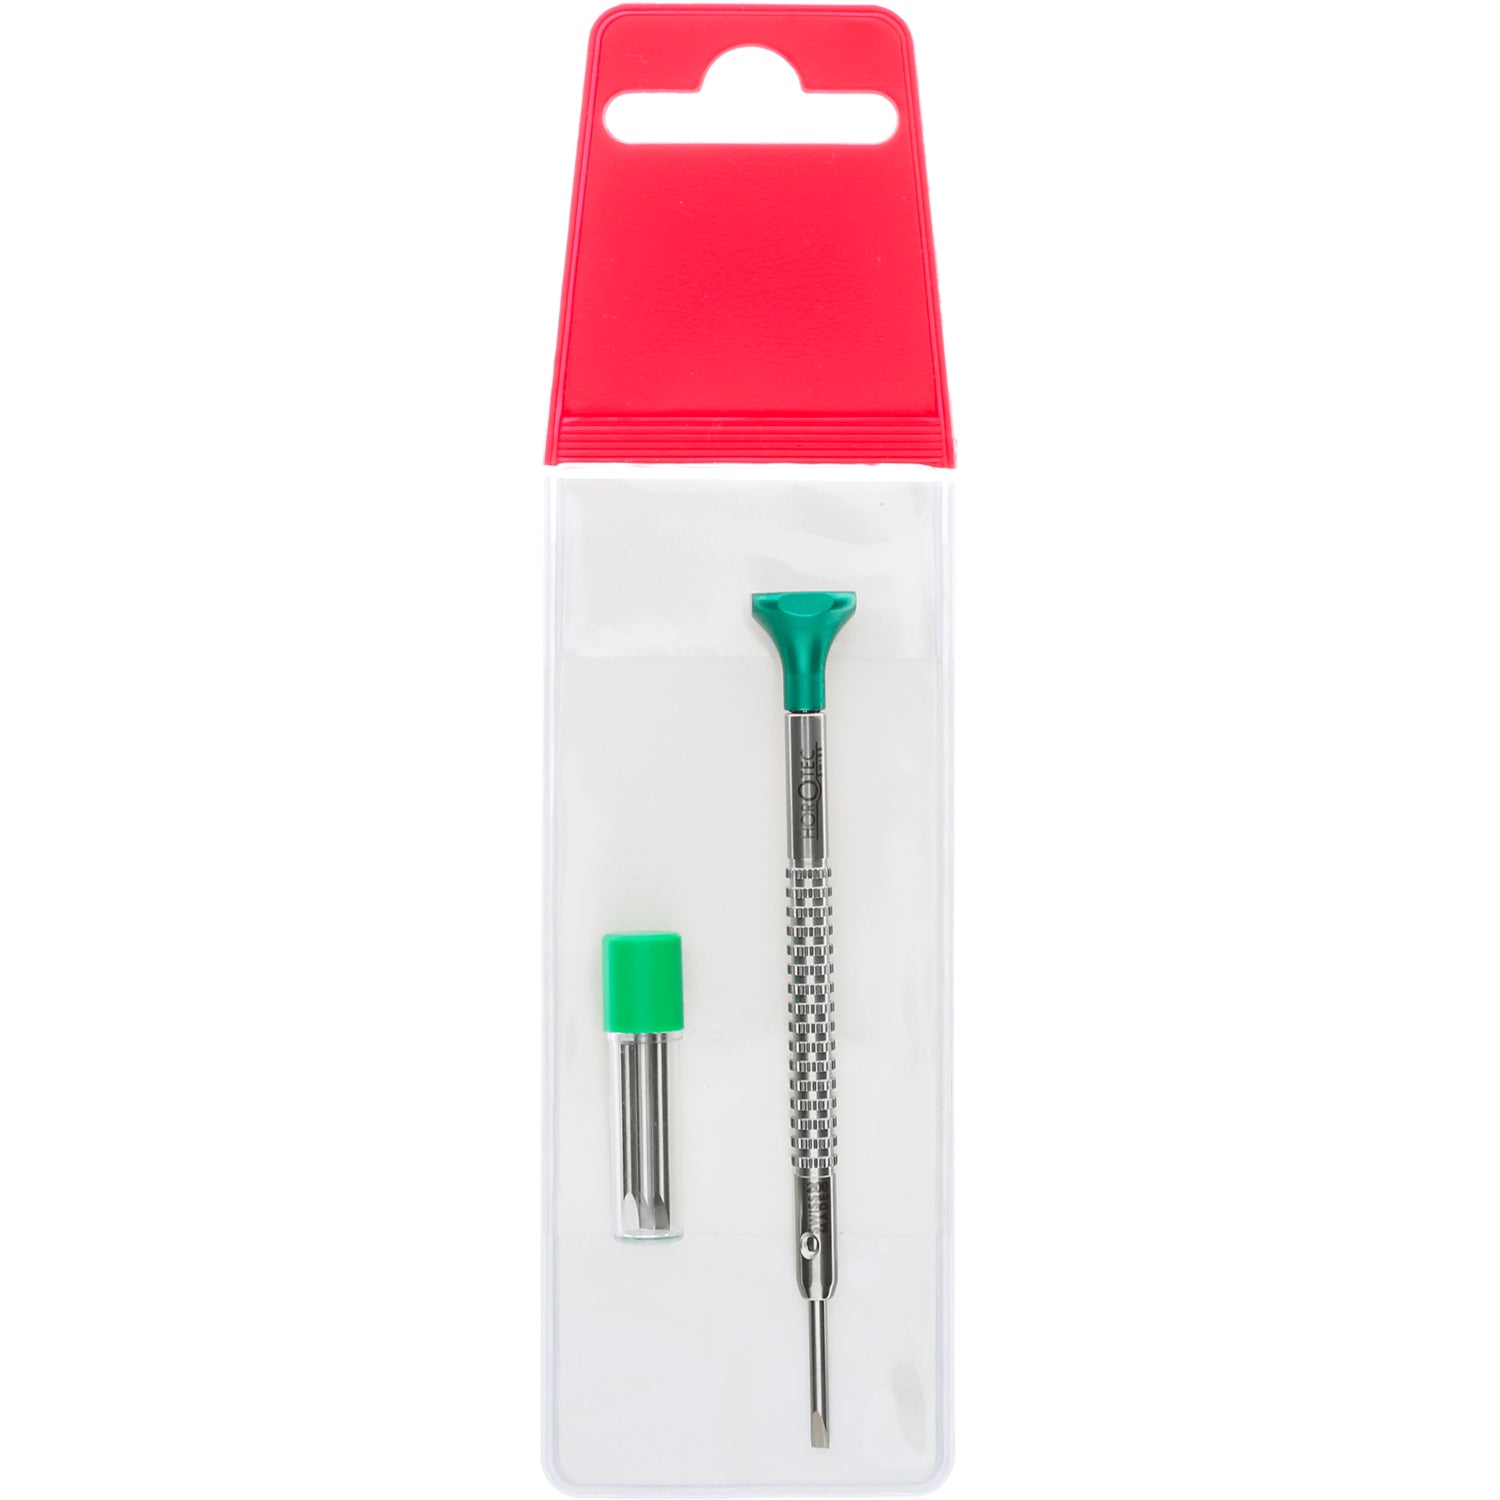 Horotec MSA01.219 Individual Ball Bearing Stainless Steel Screwdriver with 3 Blades